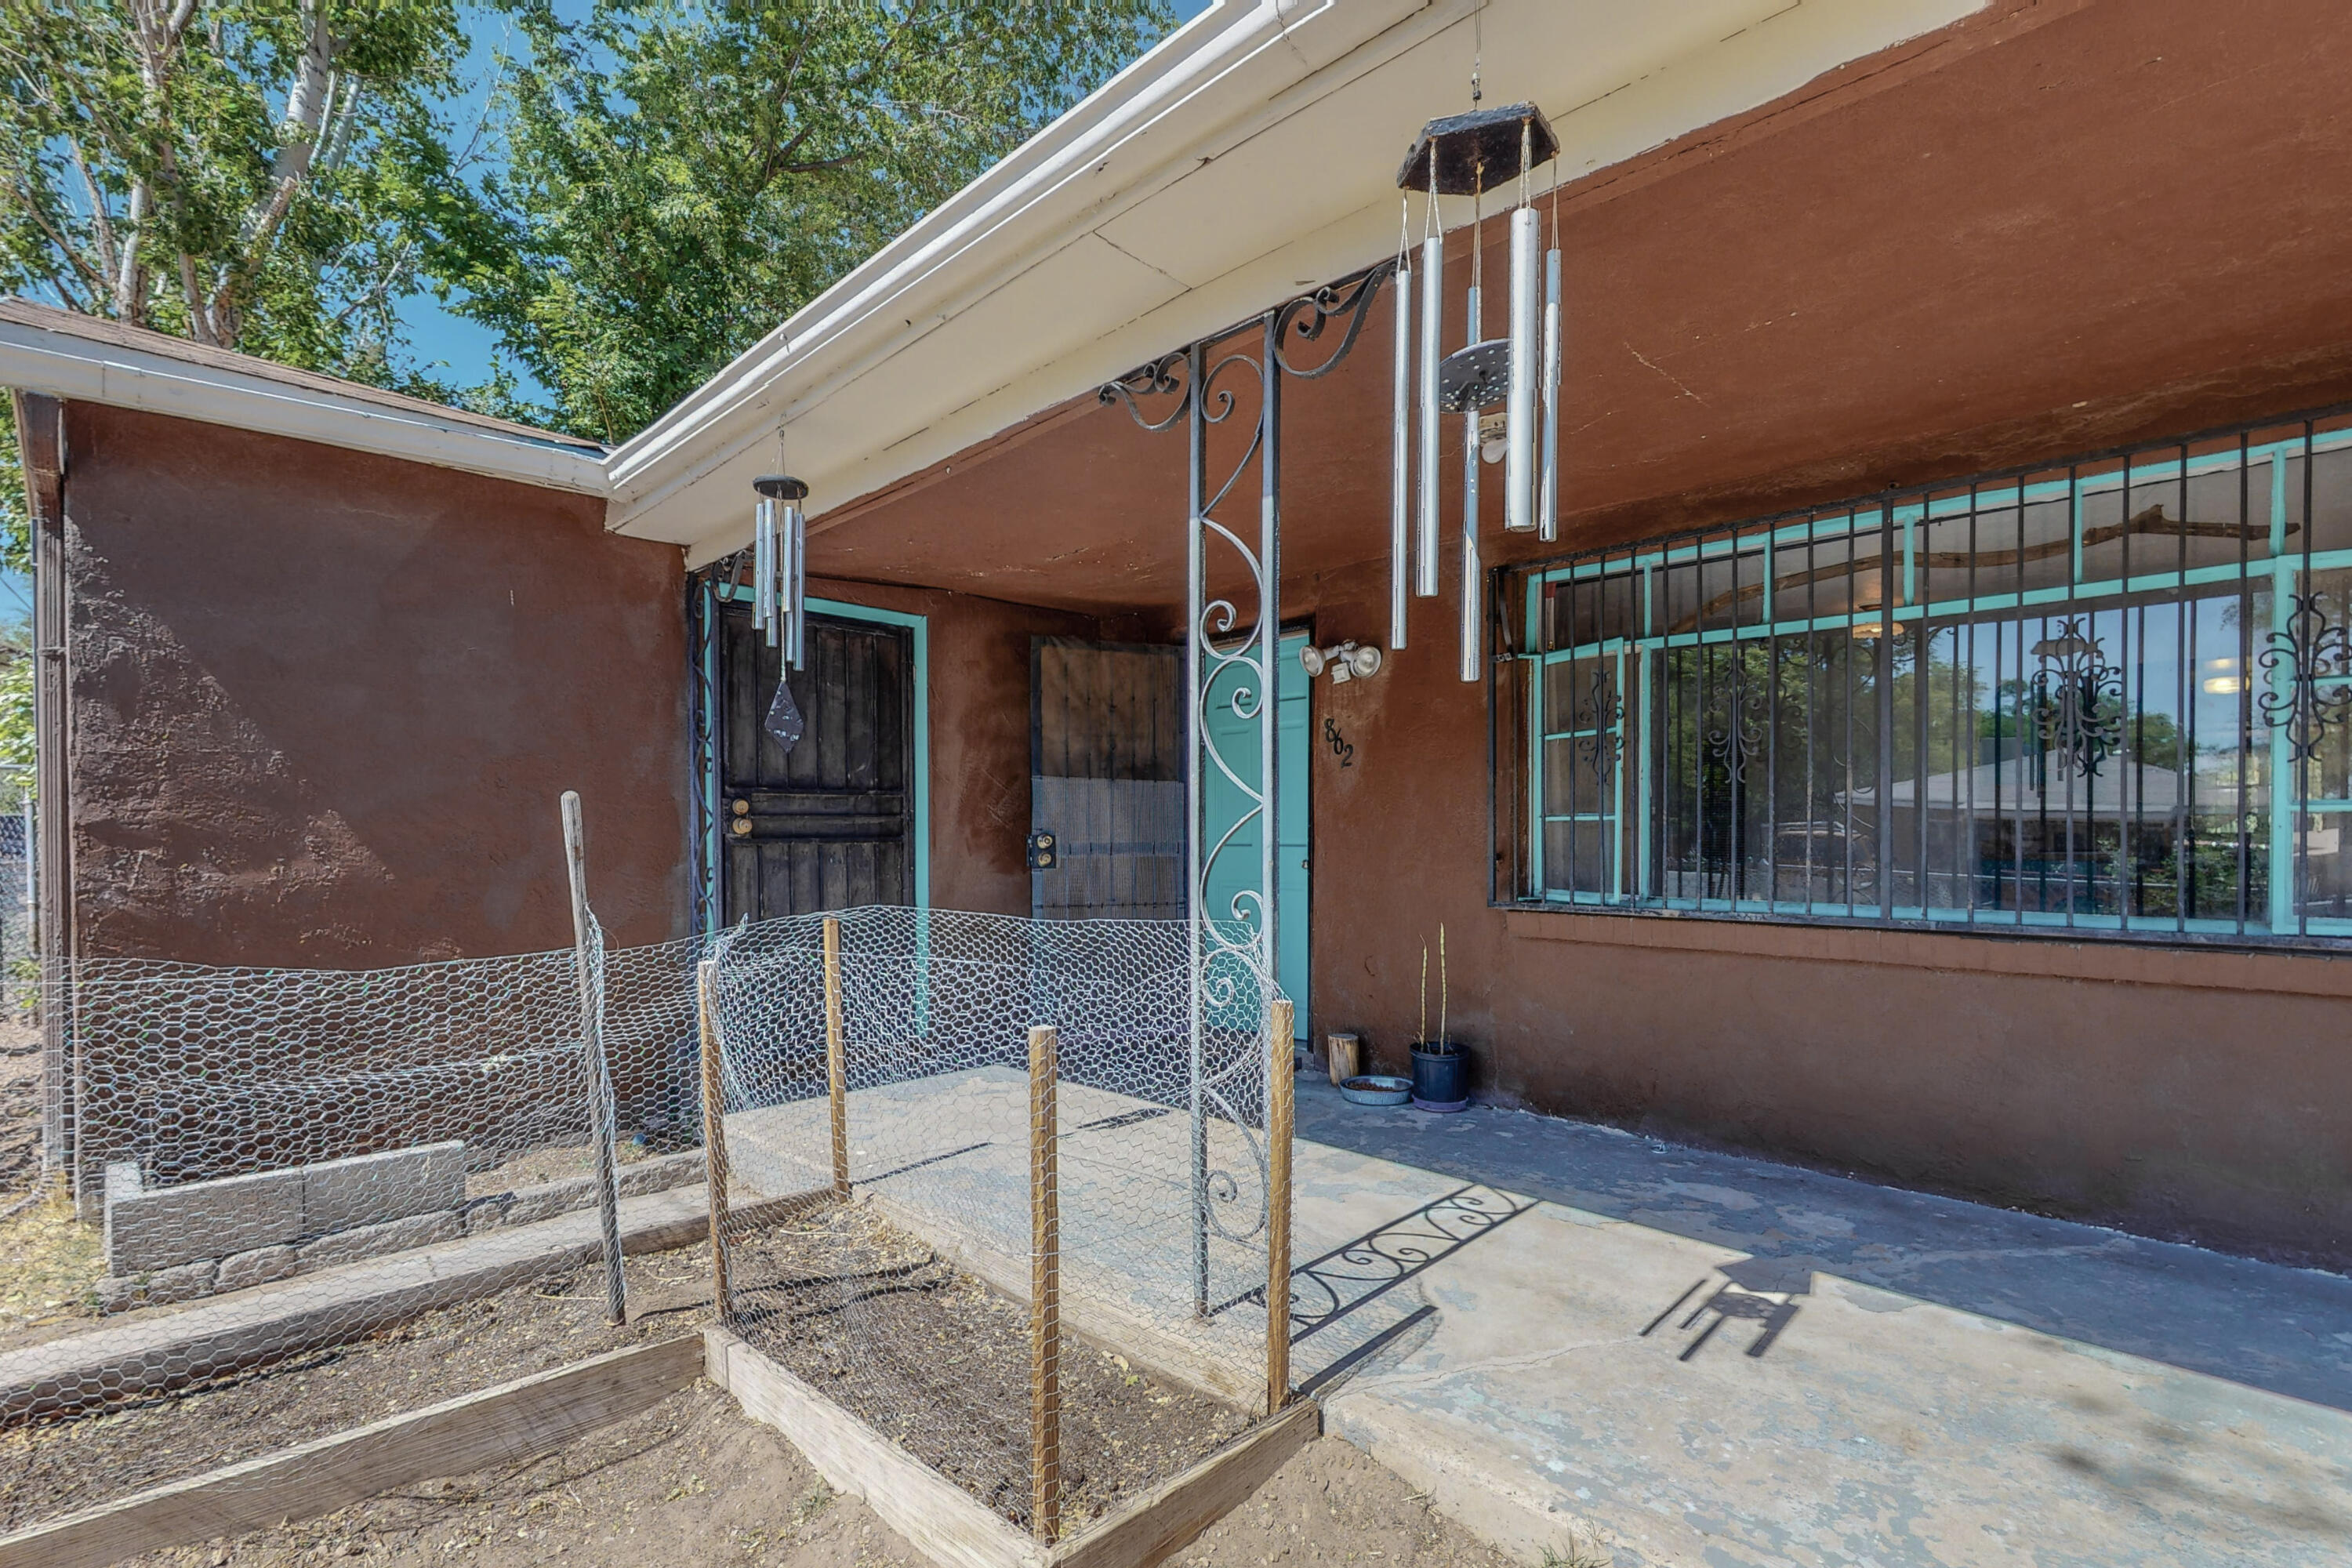 UNDER $200,000! This South Valley charmer with wood floors has everything you're looking for and so much more potential. Side yard access! Grape Vines! Within a half mile to the Bosque trail and the community center. You'll have plenty of activities at your disposal like the Dia De Los Muertos parade and the annual South Valley Parade. Come see this one before it's gone.